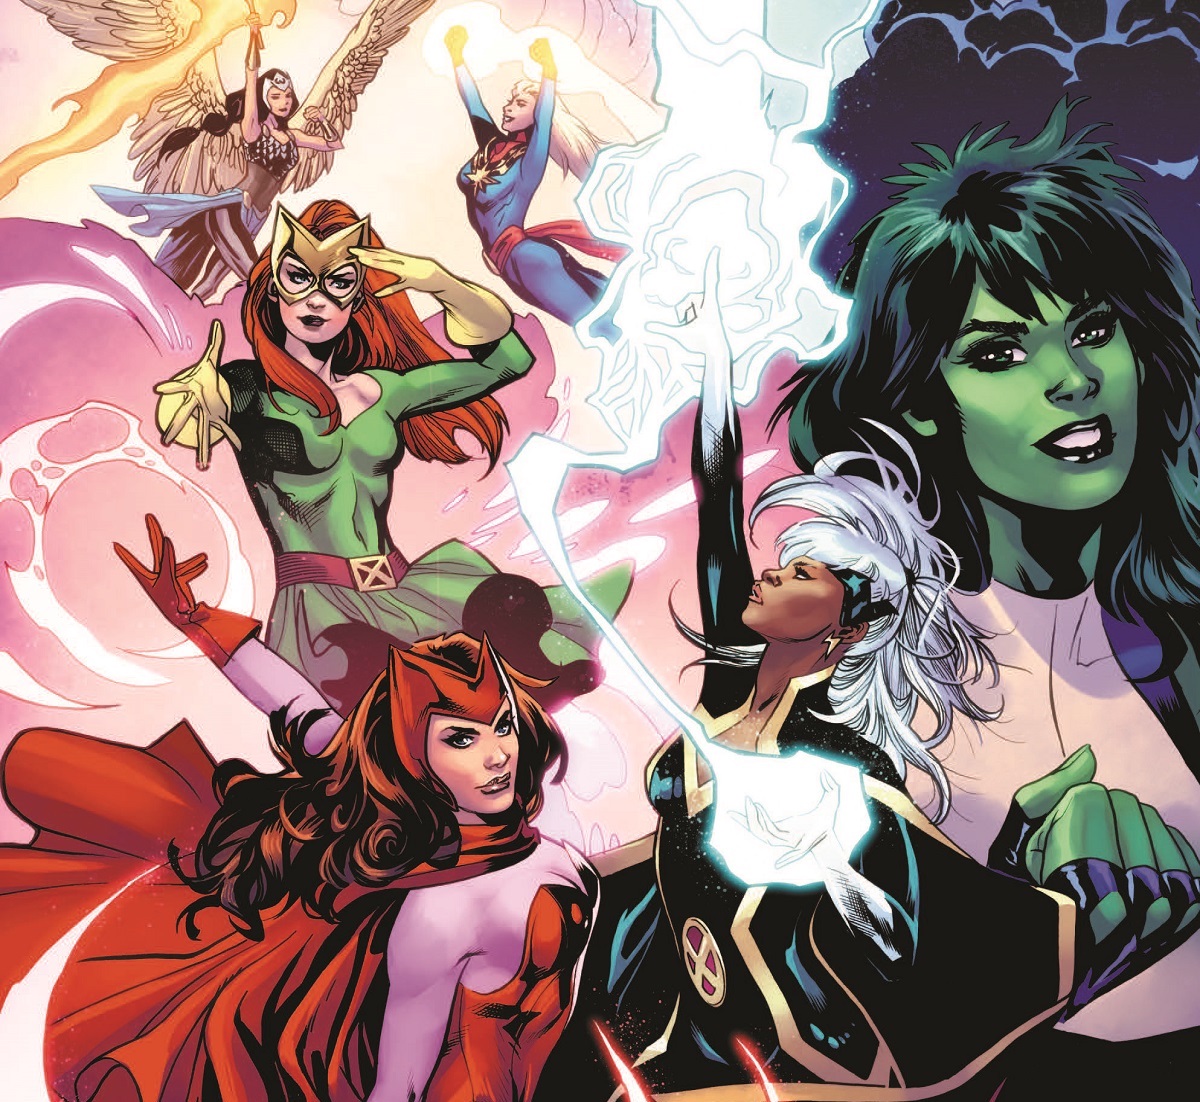 'Women of Marvel' TPB packs a lot of content into a slim package